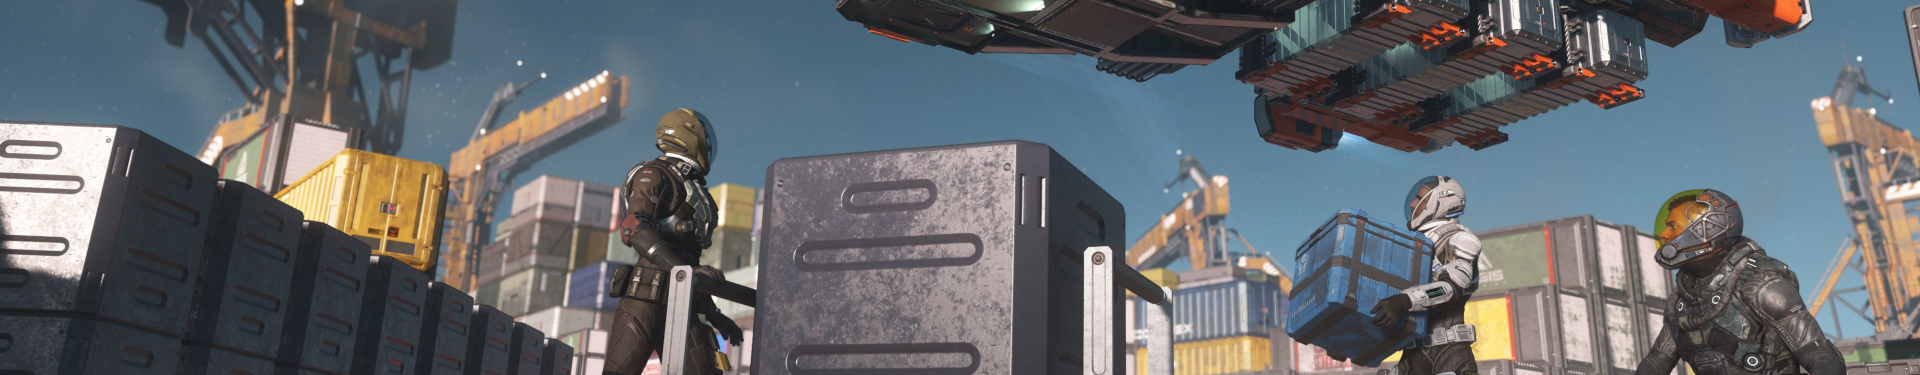 Cargo-Banner-01.png